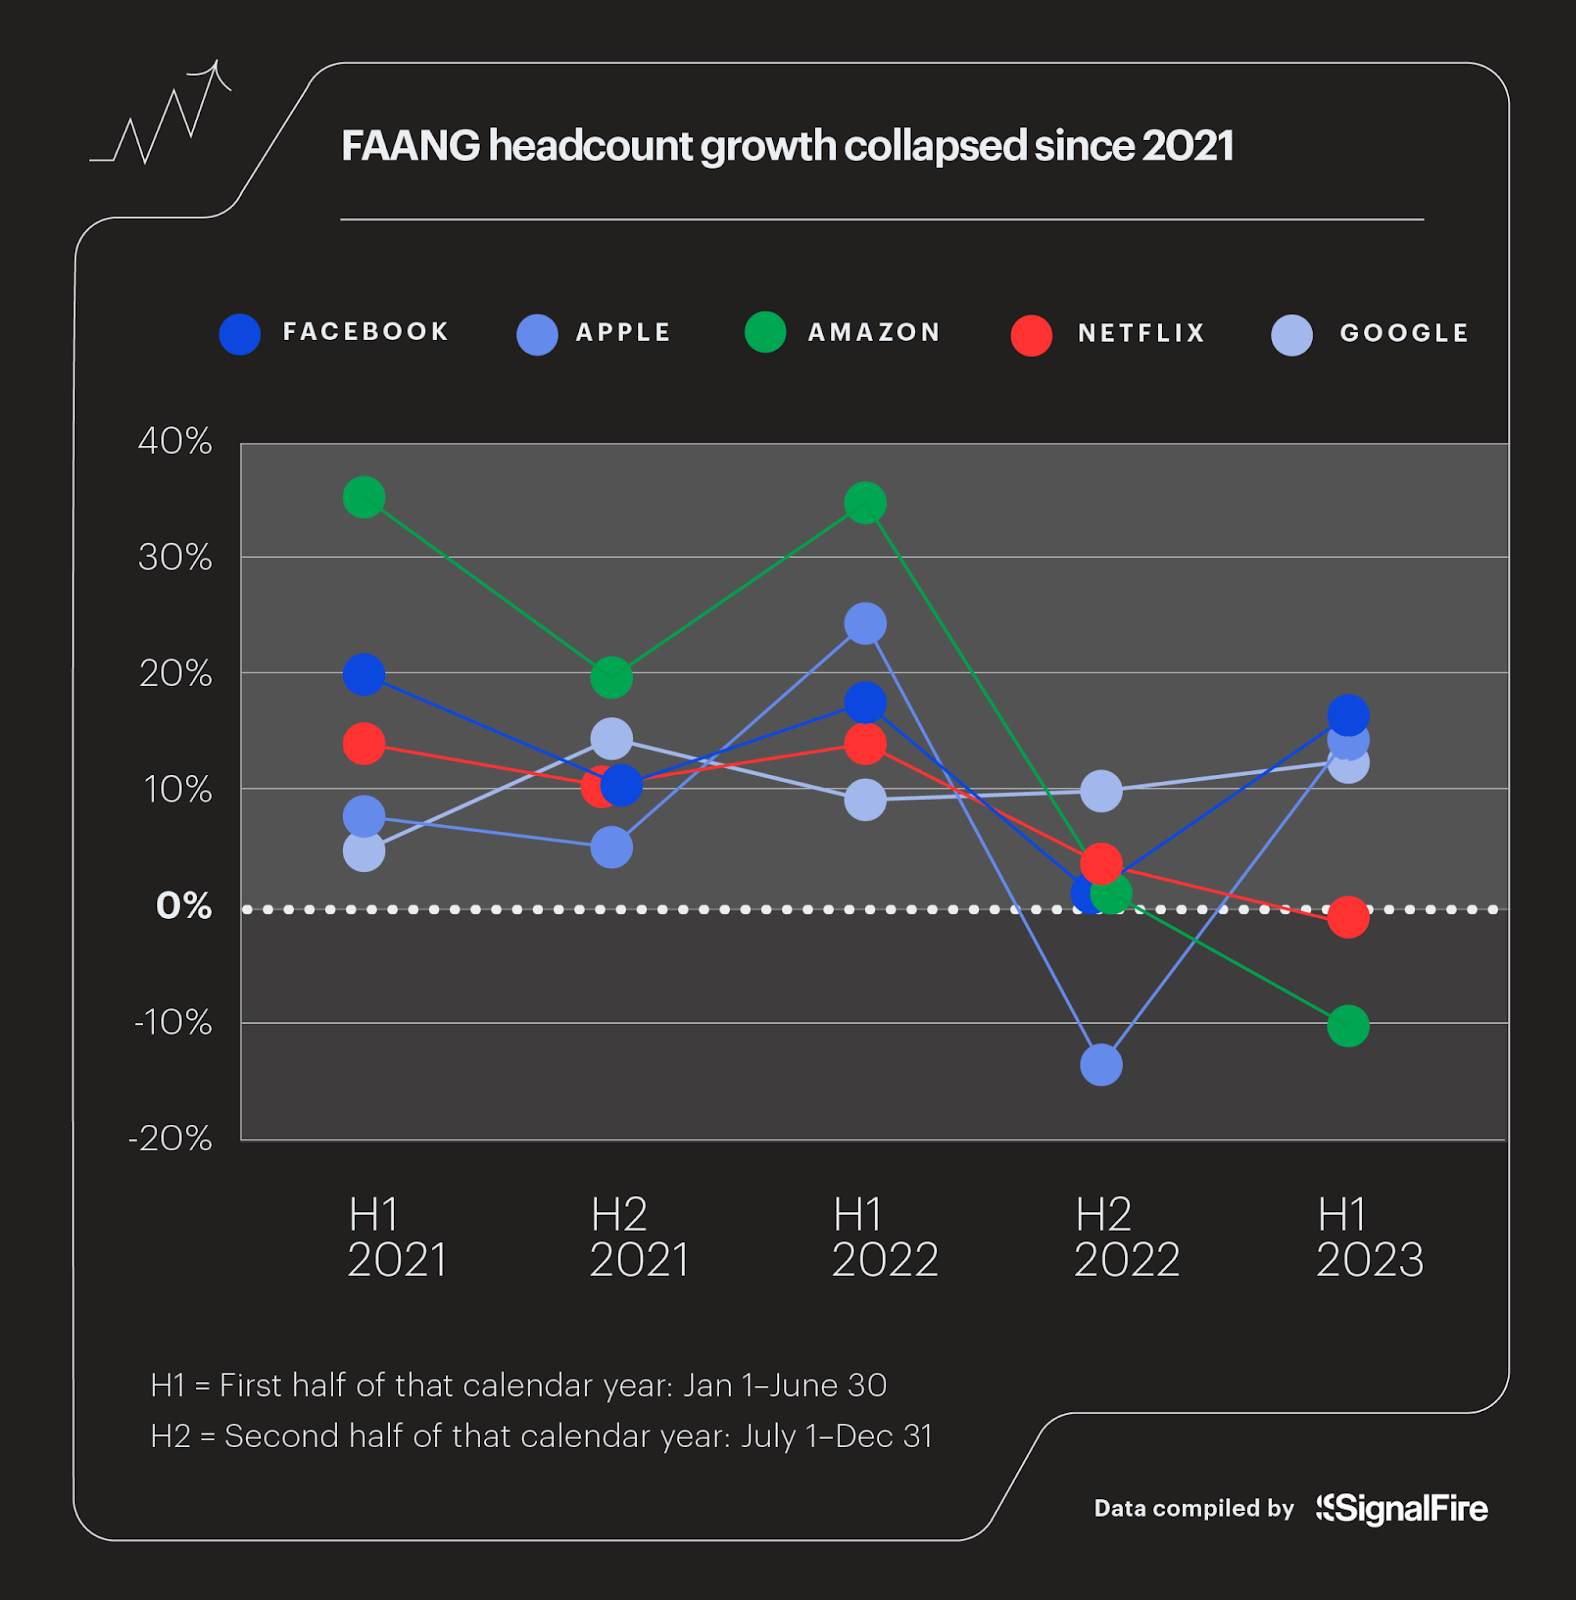 FAANG headcount growth collapsed since 2021